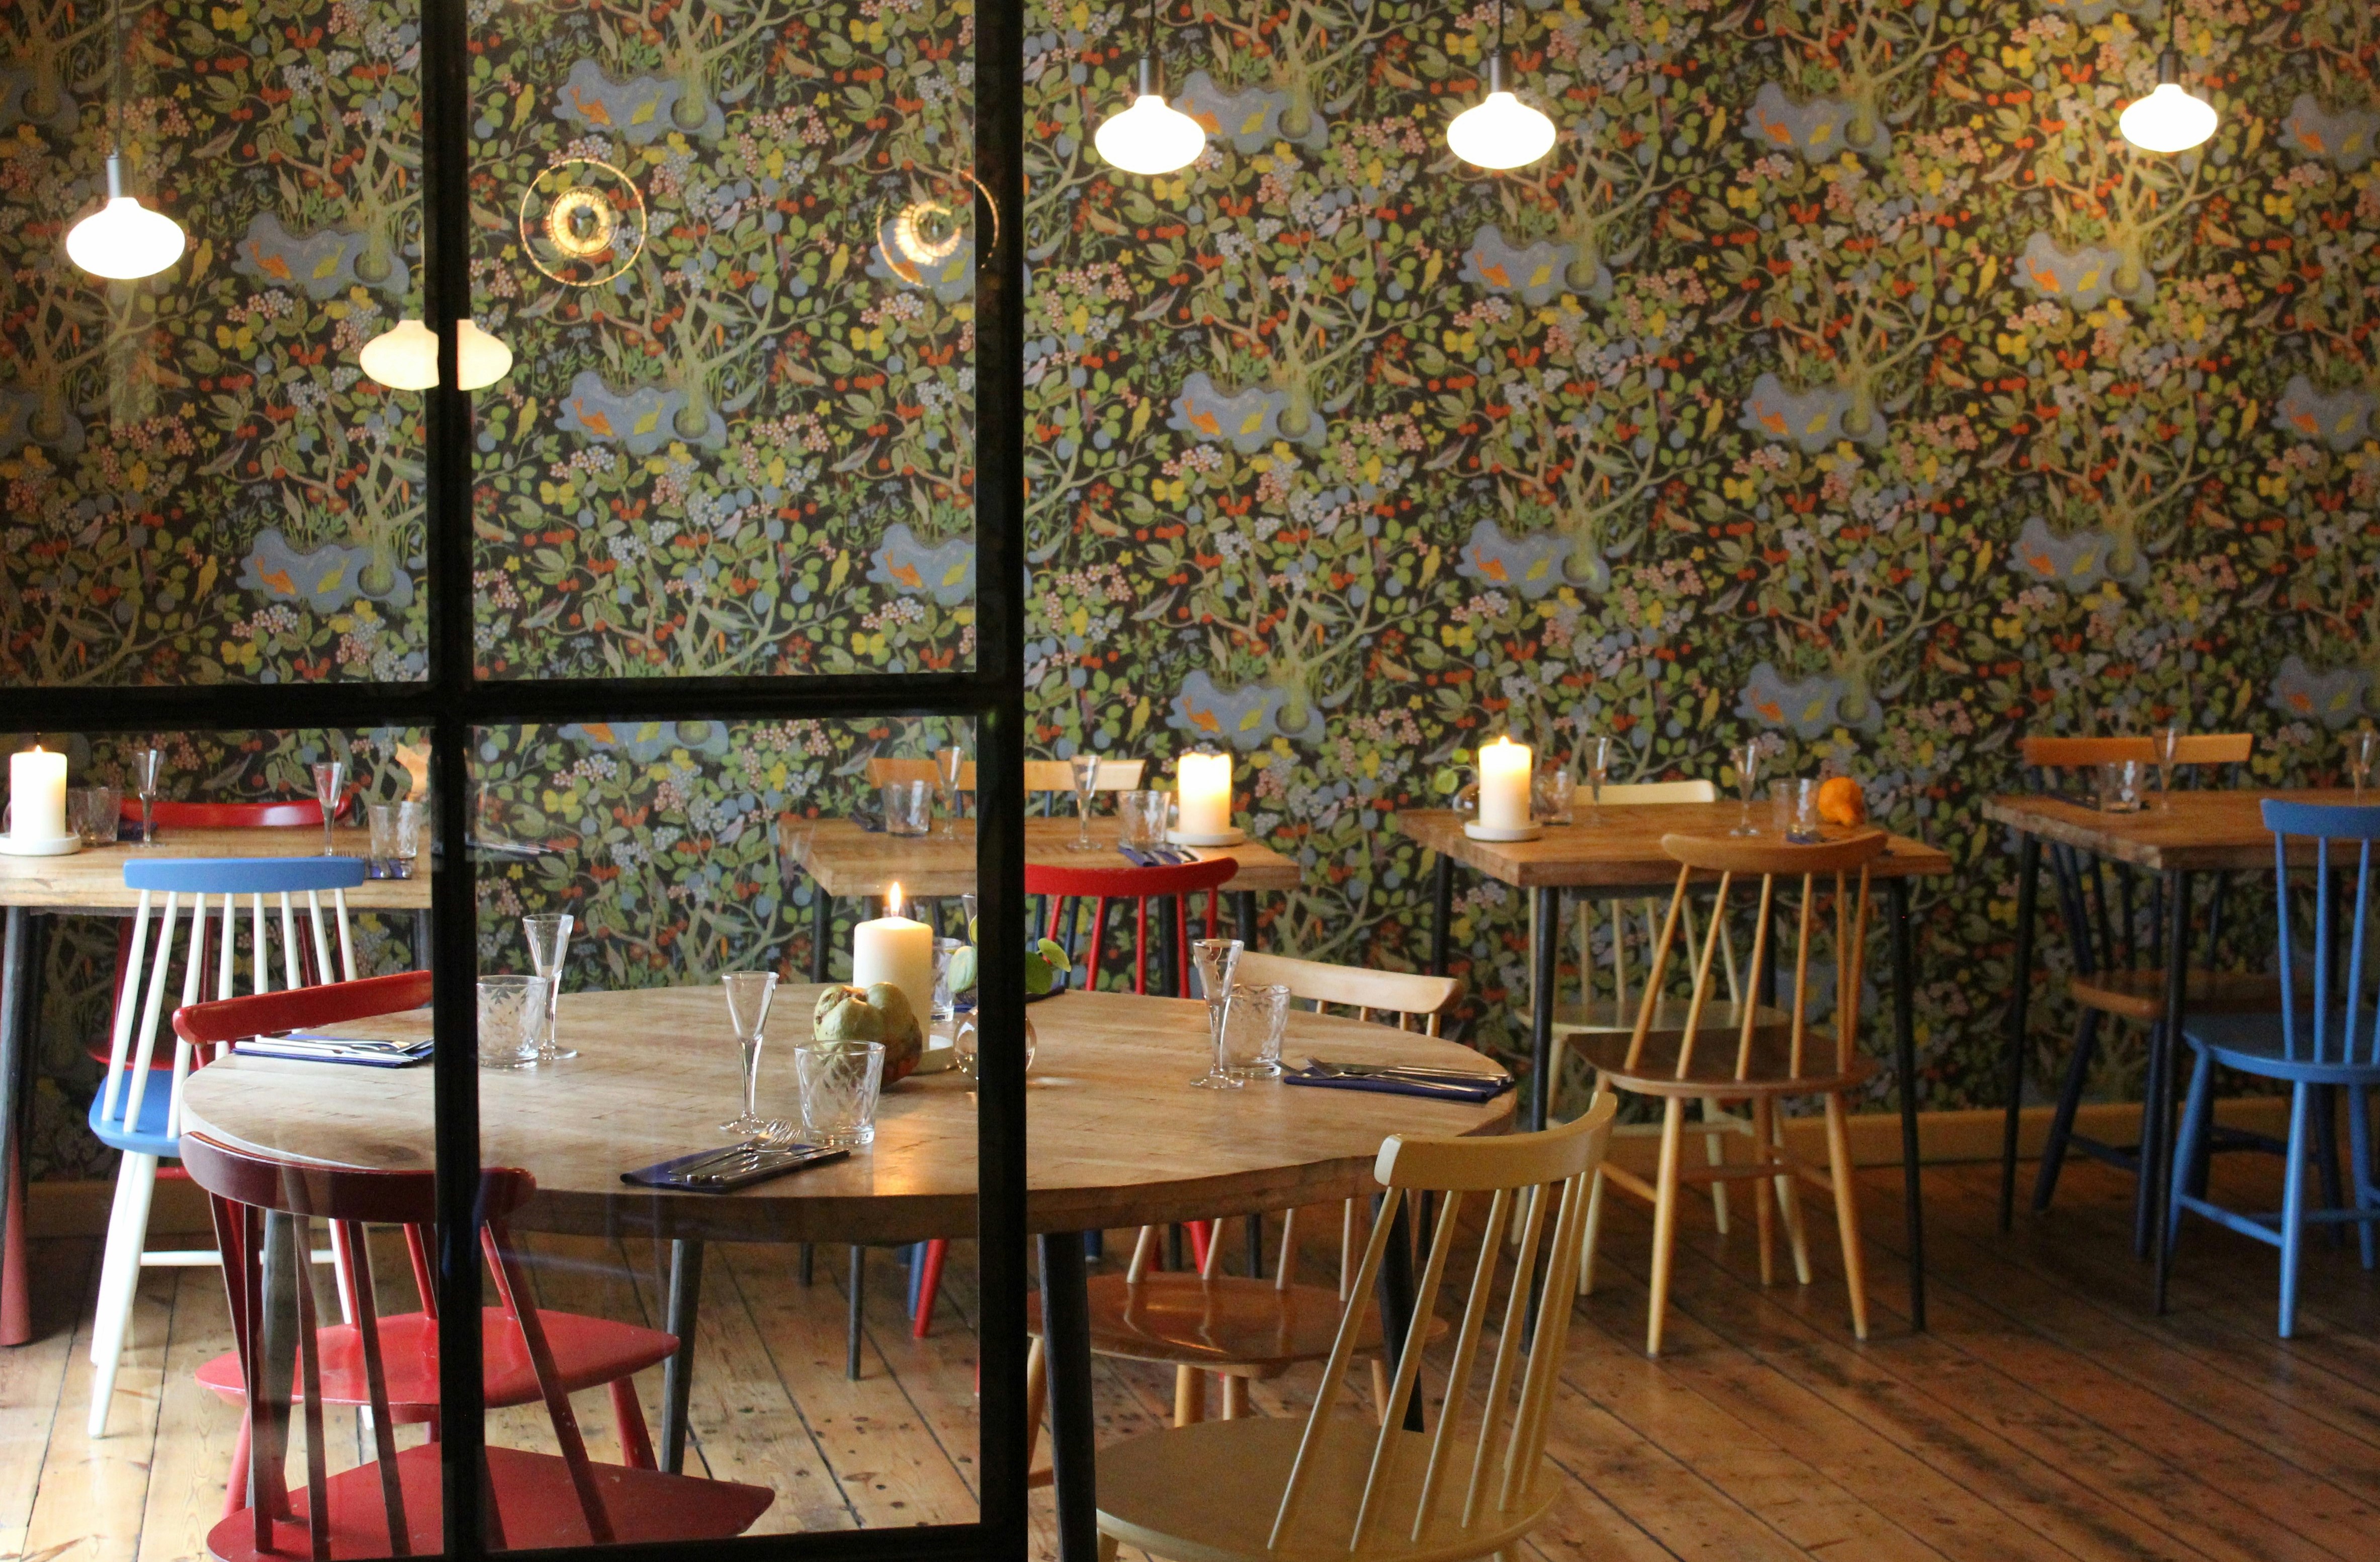 The interior of Selma restaurant in Copenhagen; it has floral wallpaper and wooden tables with mismatched chairs.